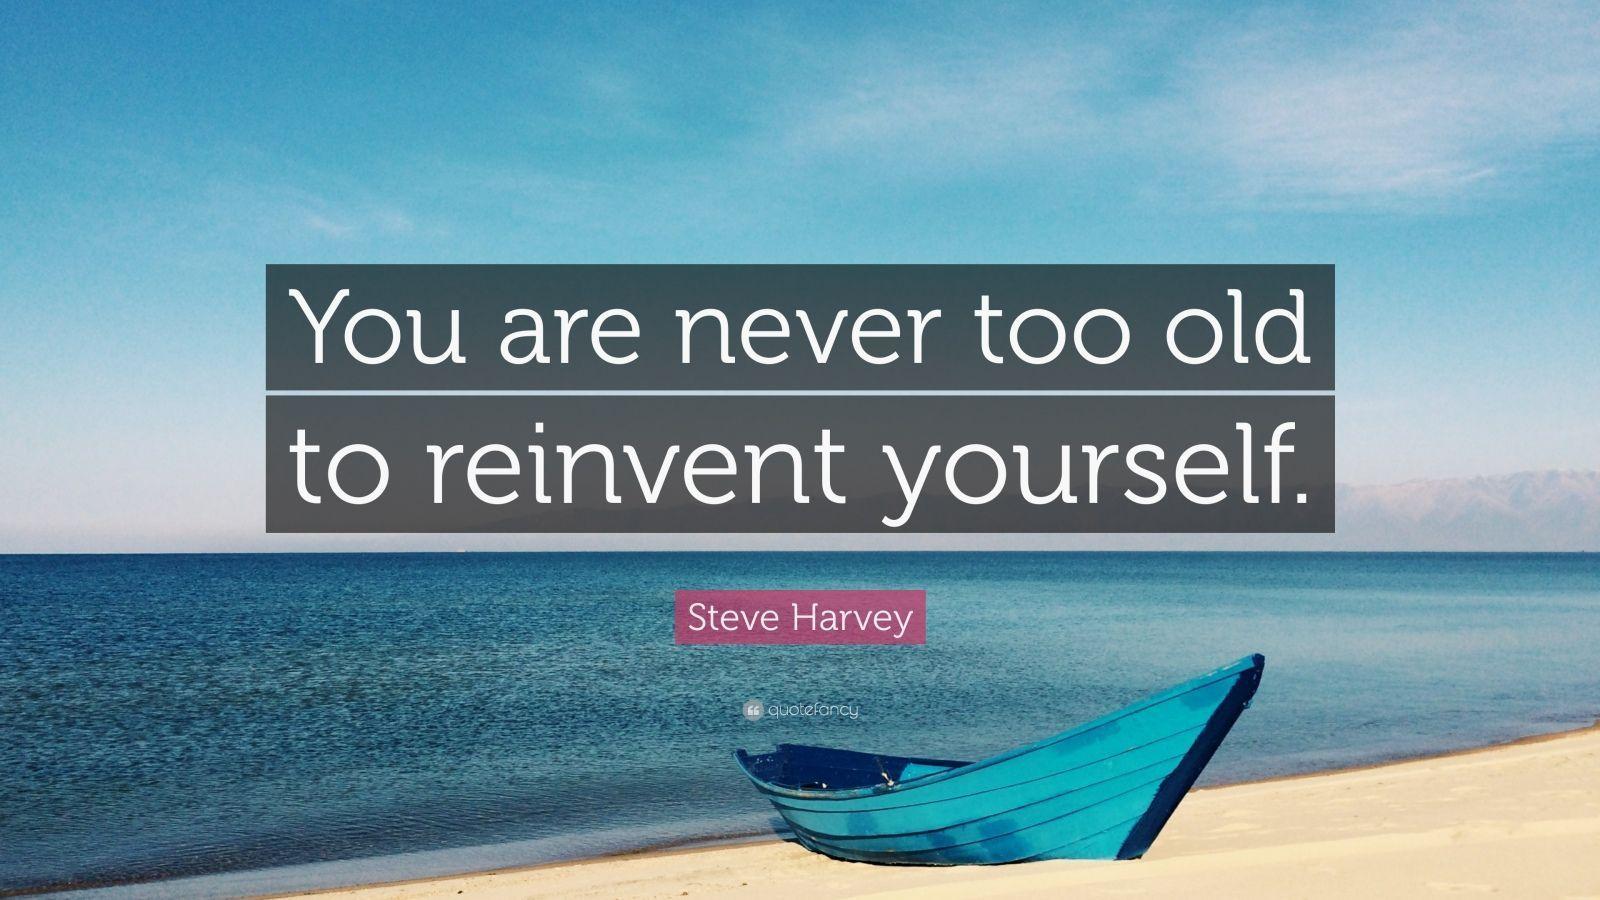 Steve Harvey Quote: “You are never too old to reinvent yourself